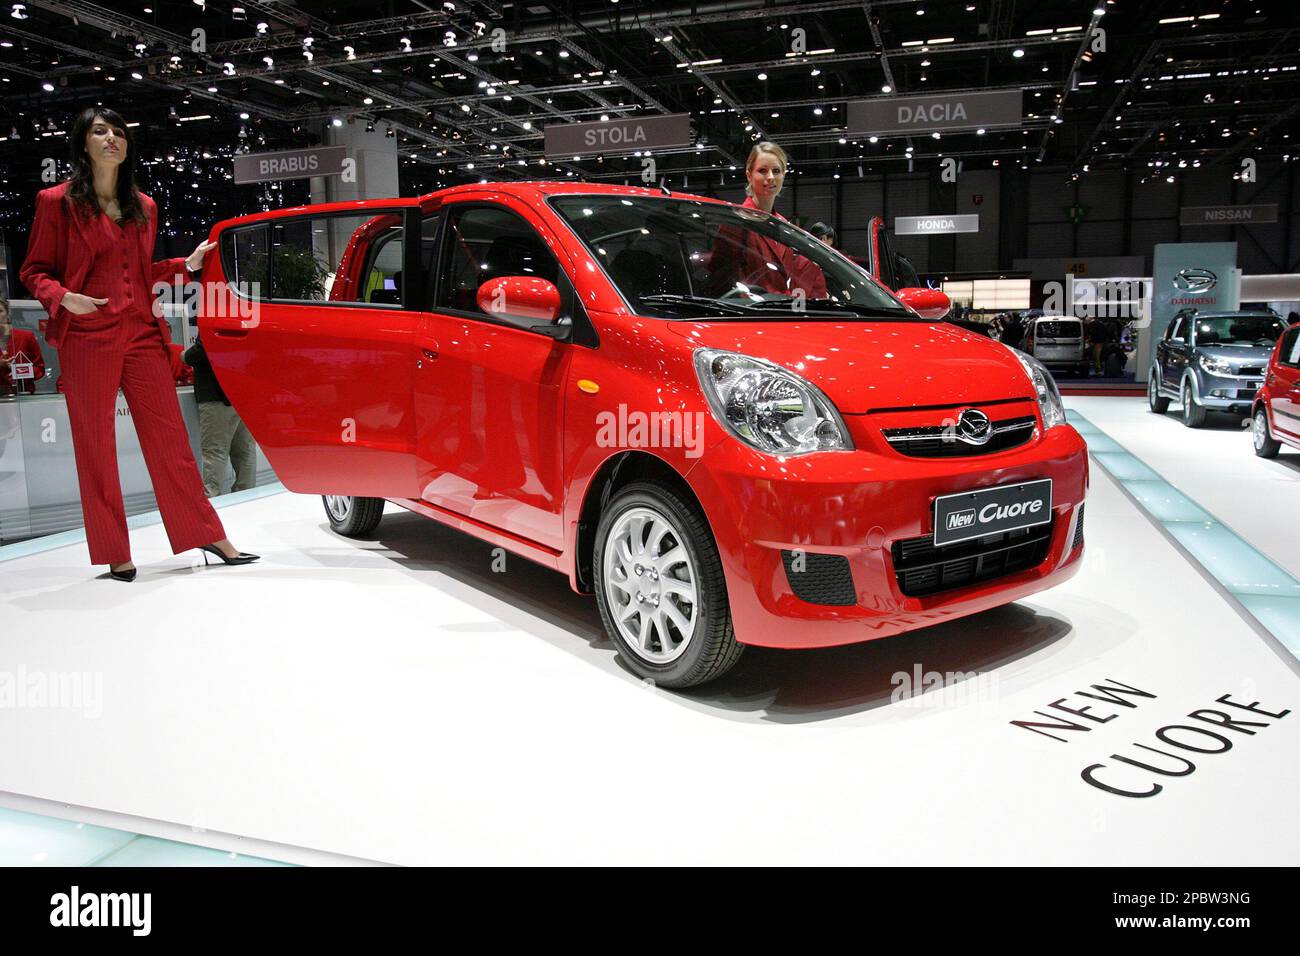 Models stand next to a new Daihatsu Cuore eco top car during the press days  at the 77th Geneva International Motor Show in Geneva, Switzerland,  Wednesday, March 7, 2007. The Motor Show